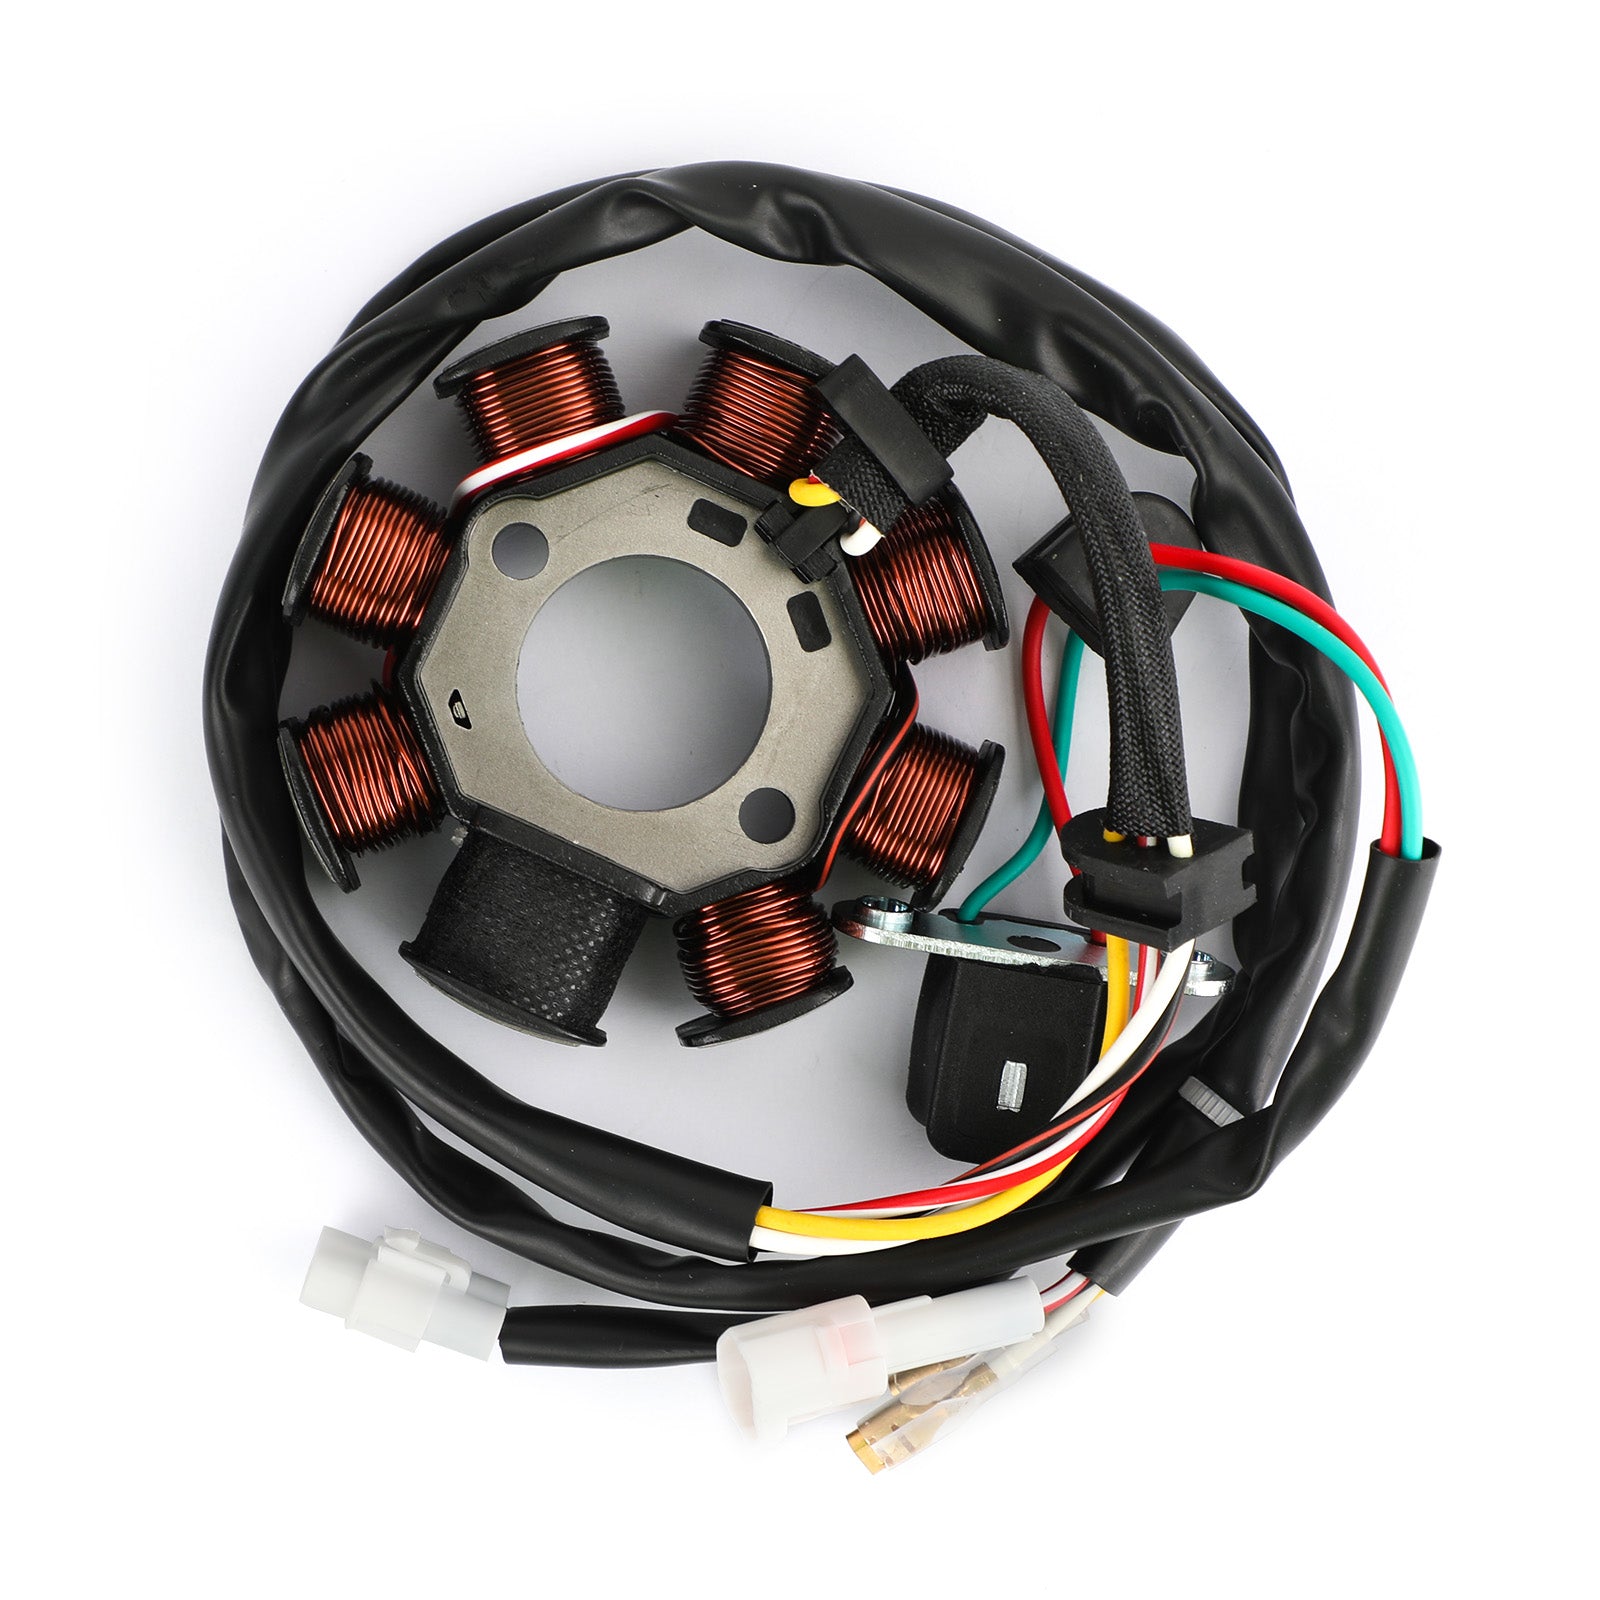 Magneto Generator Engine Stator Coil Fit For Beta RR 2T 125 250 300 4T 350 400 430 450 480 498 520, Racing 2010-2018